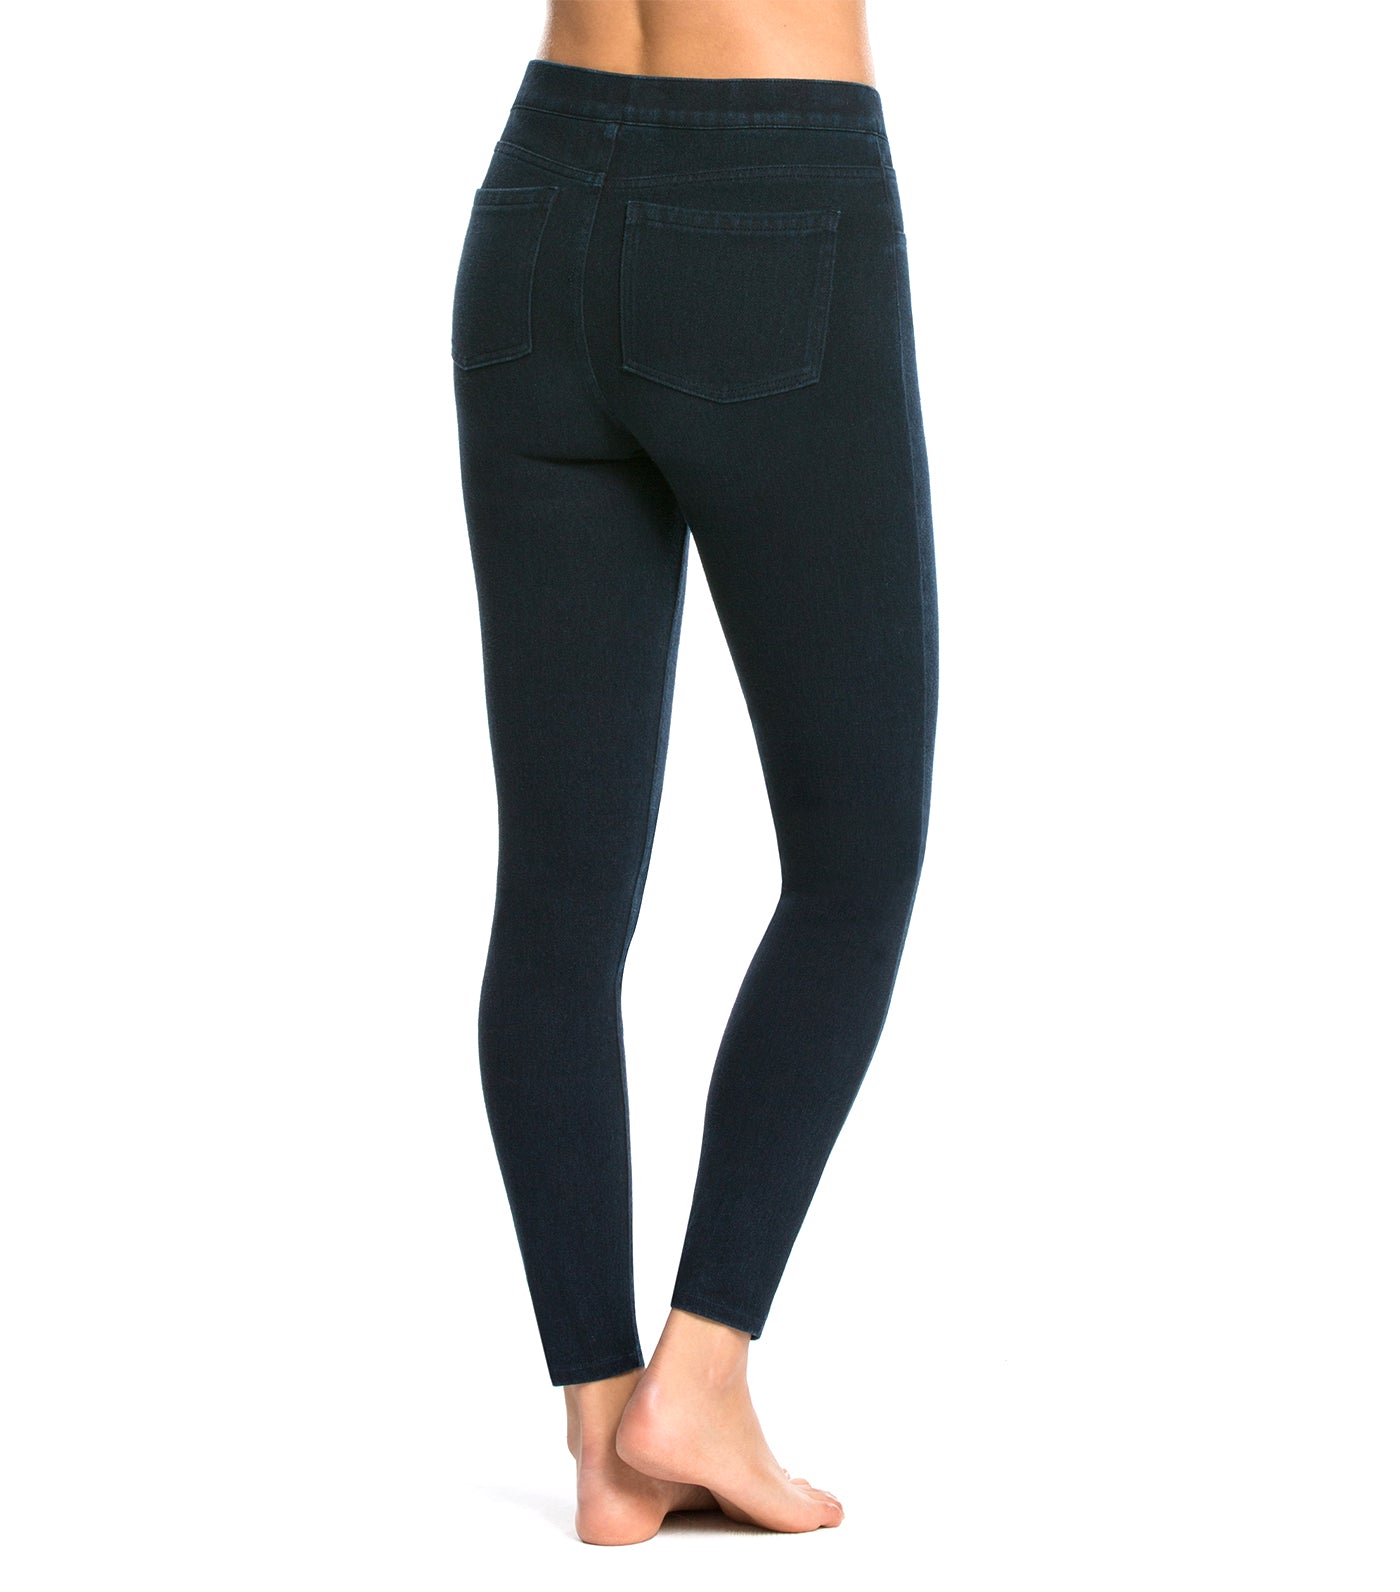 SPANX Jean-Ish Ankle Leggings in Twilight Rinse Size XS High Rise